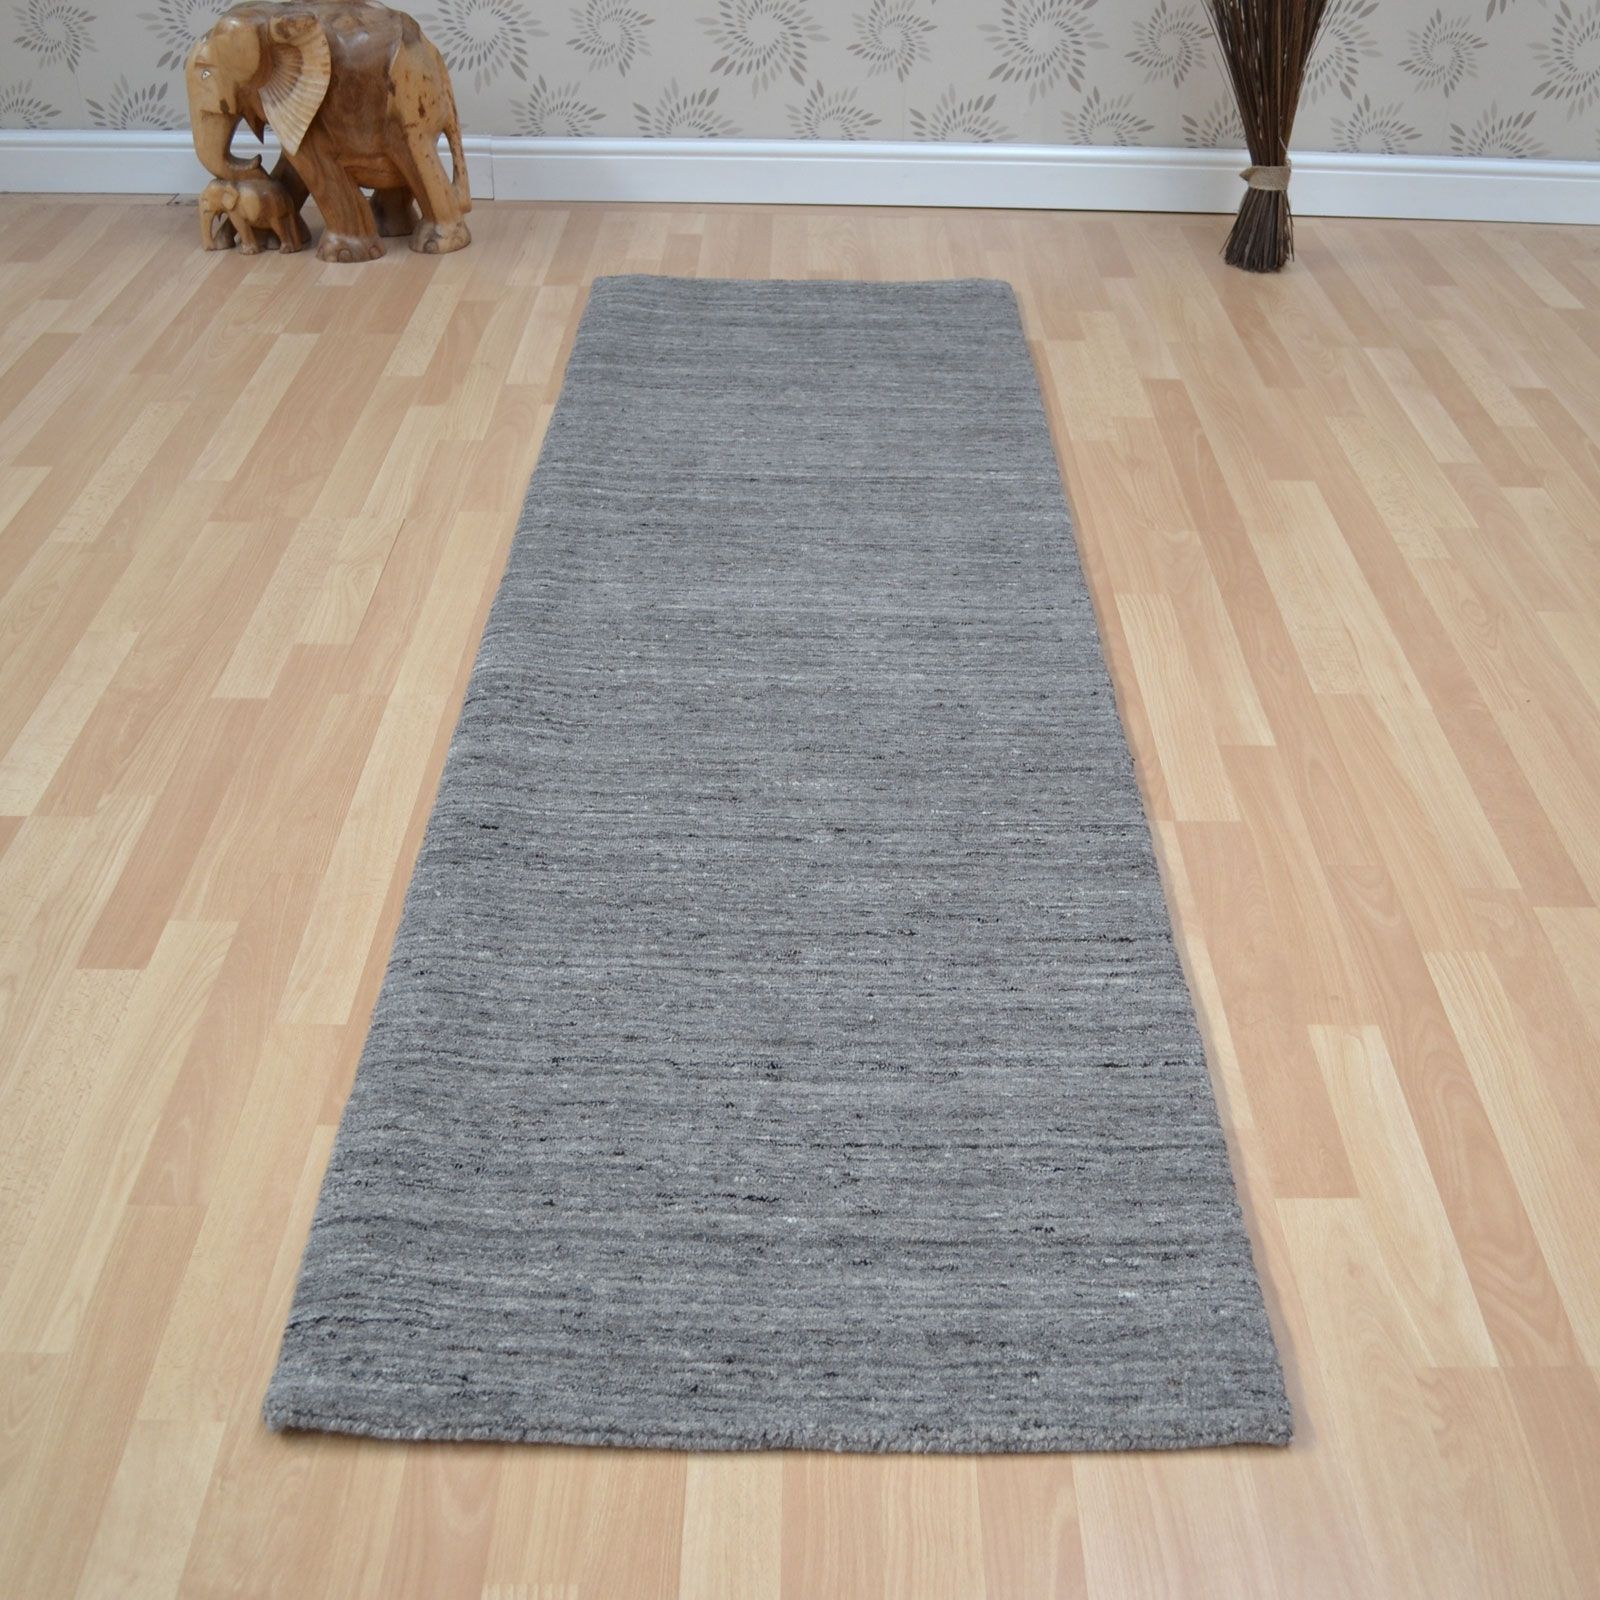 Hallway Runners Find The Best Hall Rug For Your Home Regarding Hall Runners Green (Photo 5 of 20)